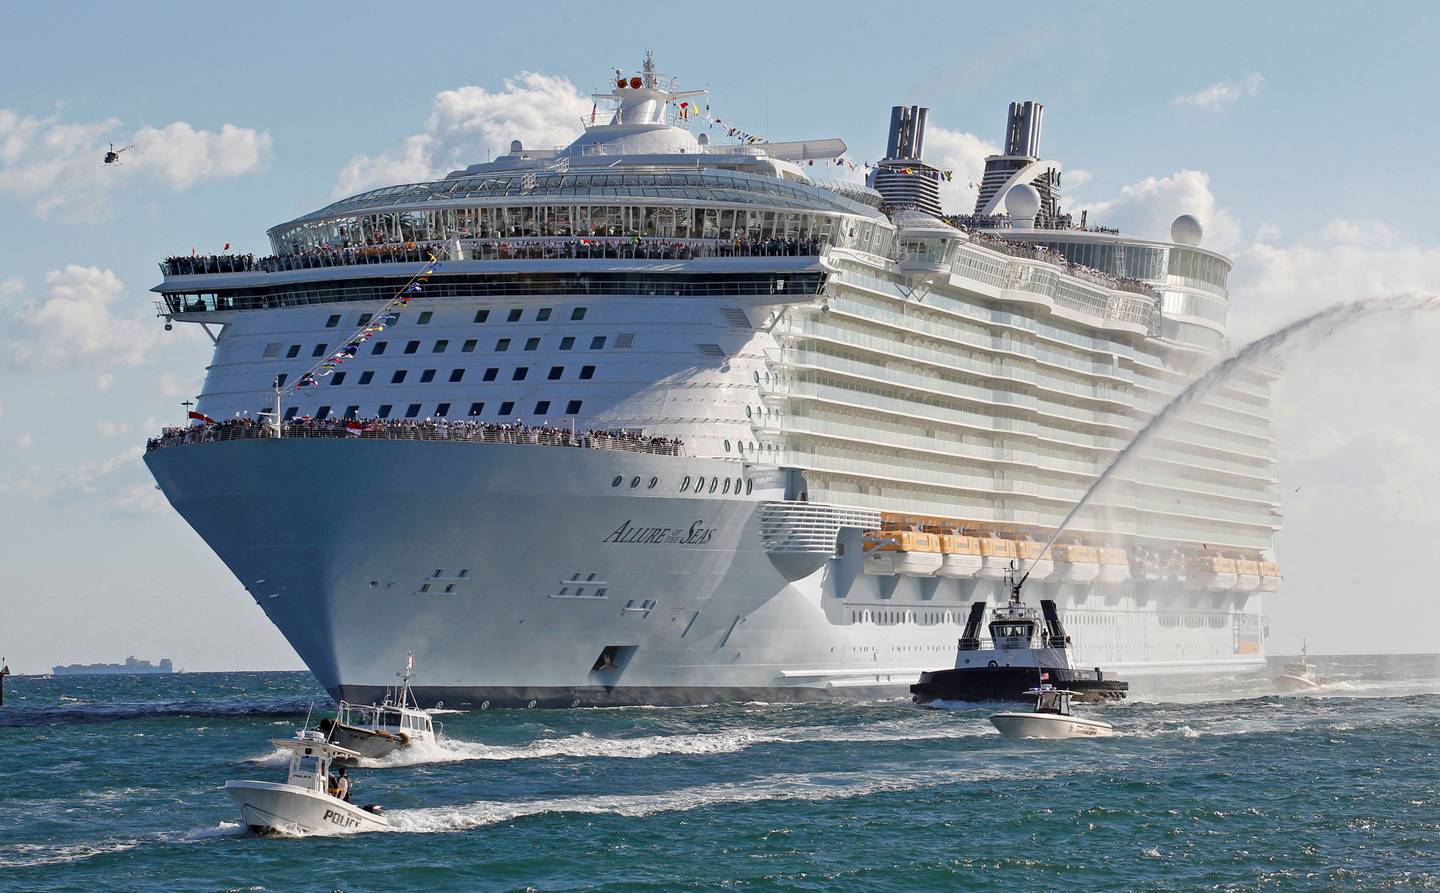 Royal Caribbean's 'Allure of the Seas' made its maiden voyage in 2009, when it accidentally became the world's longest ship. Reuters